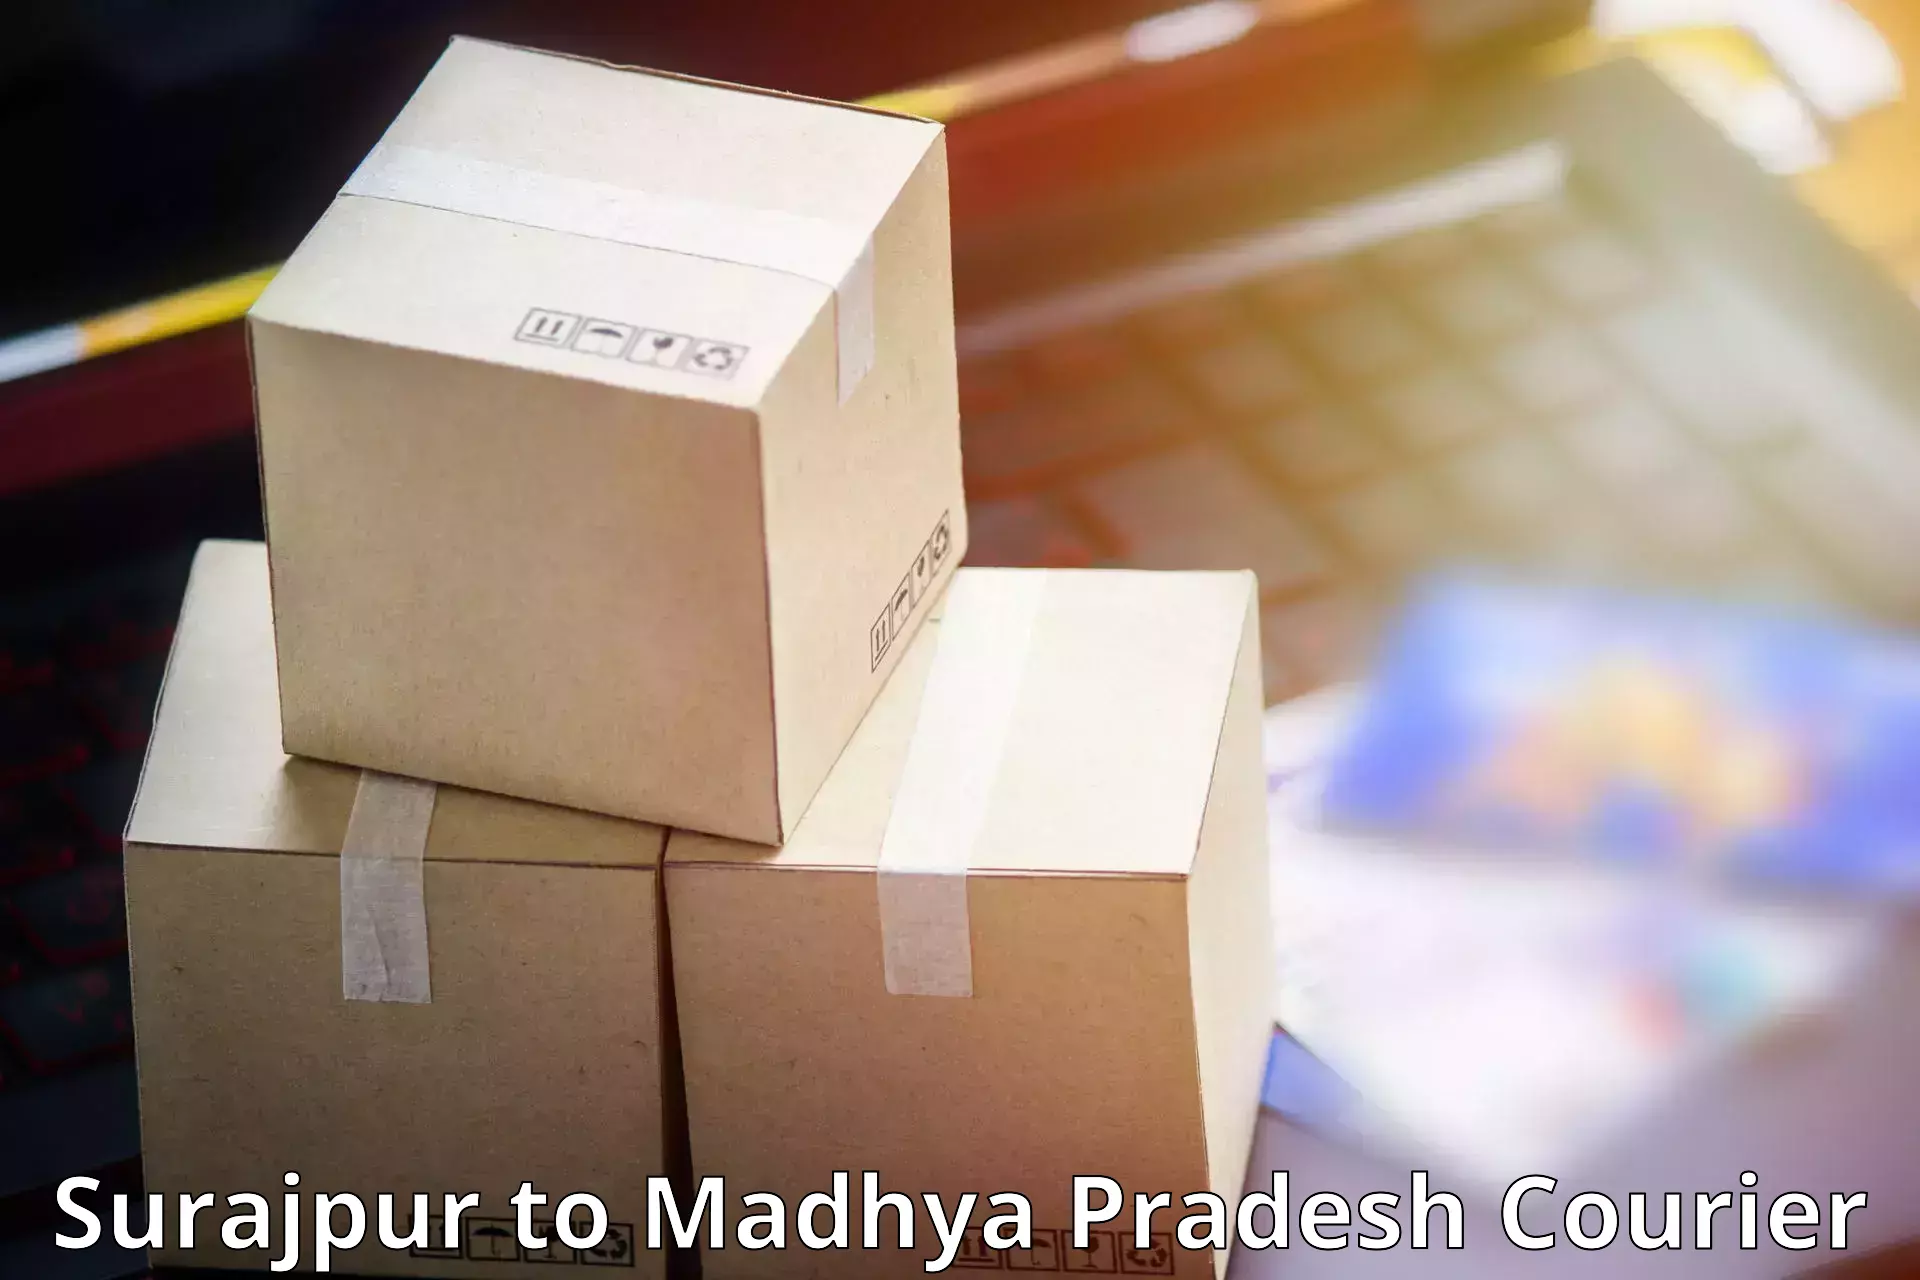 Express delivery solutions Surajpur to Katni